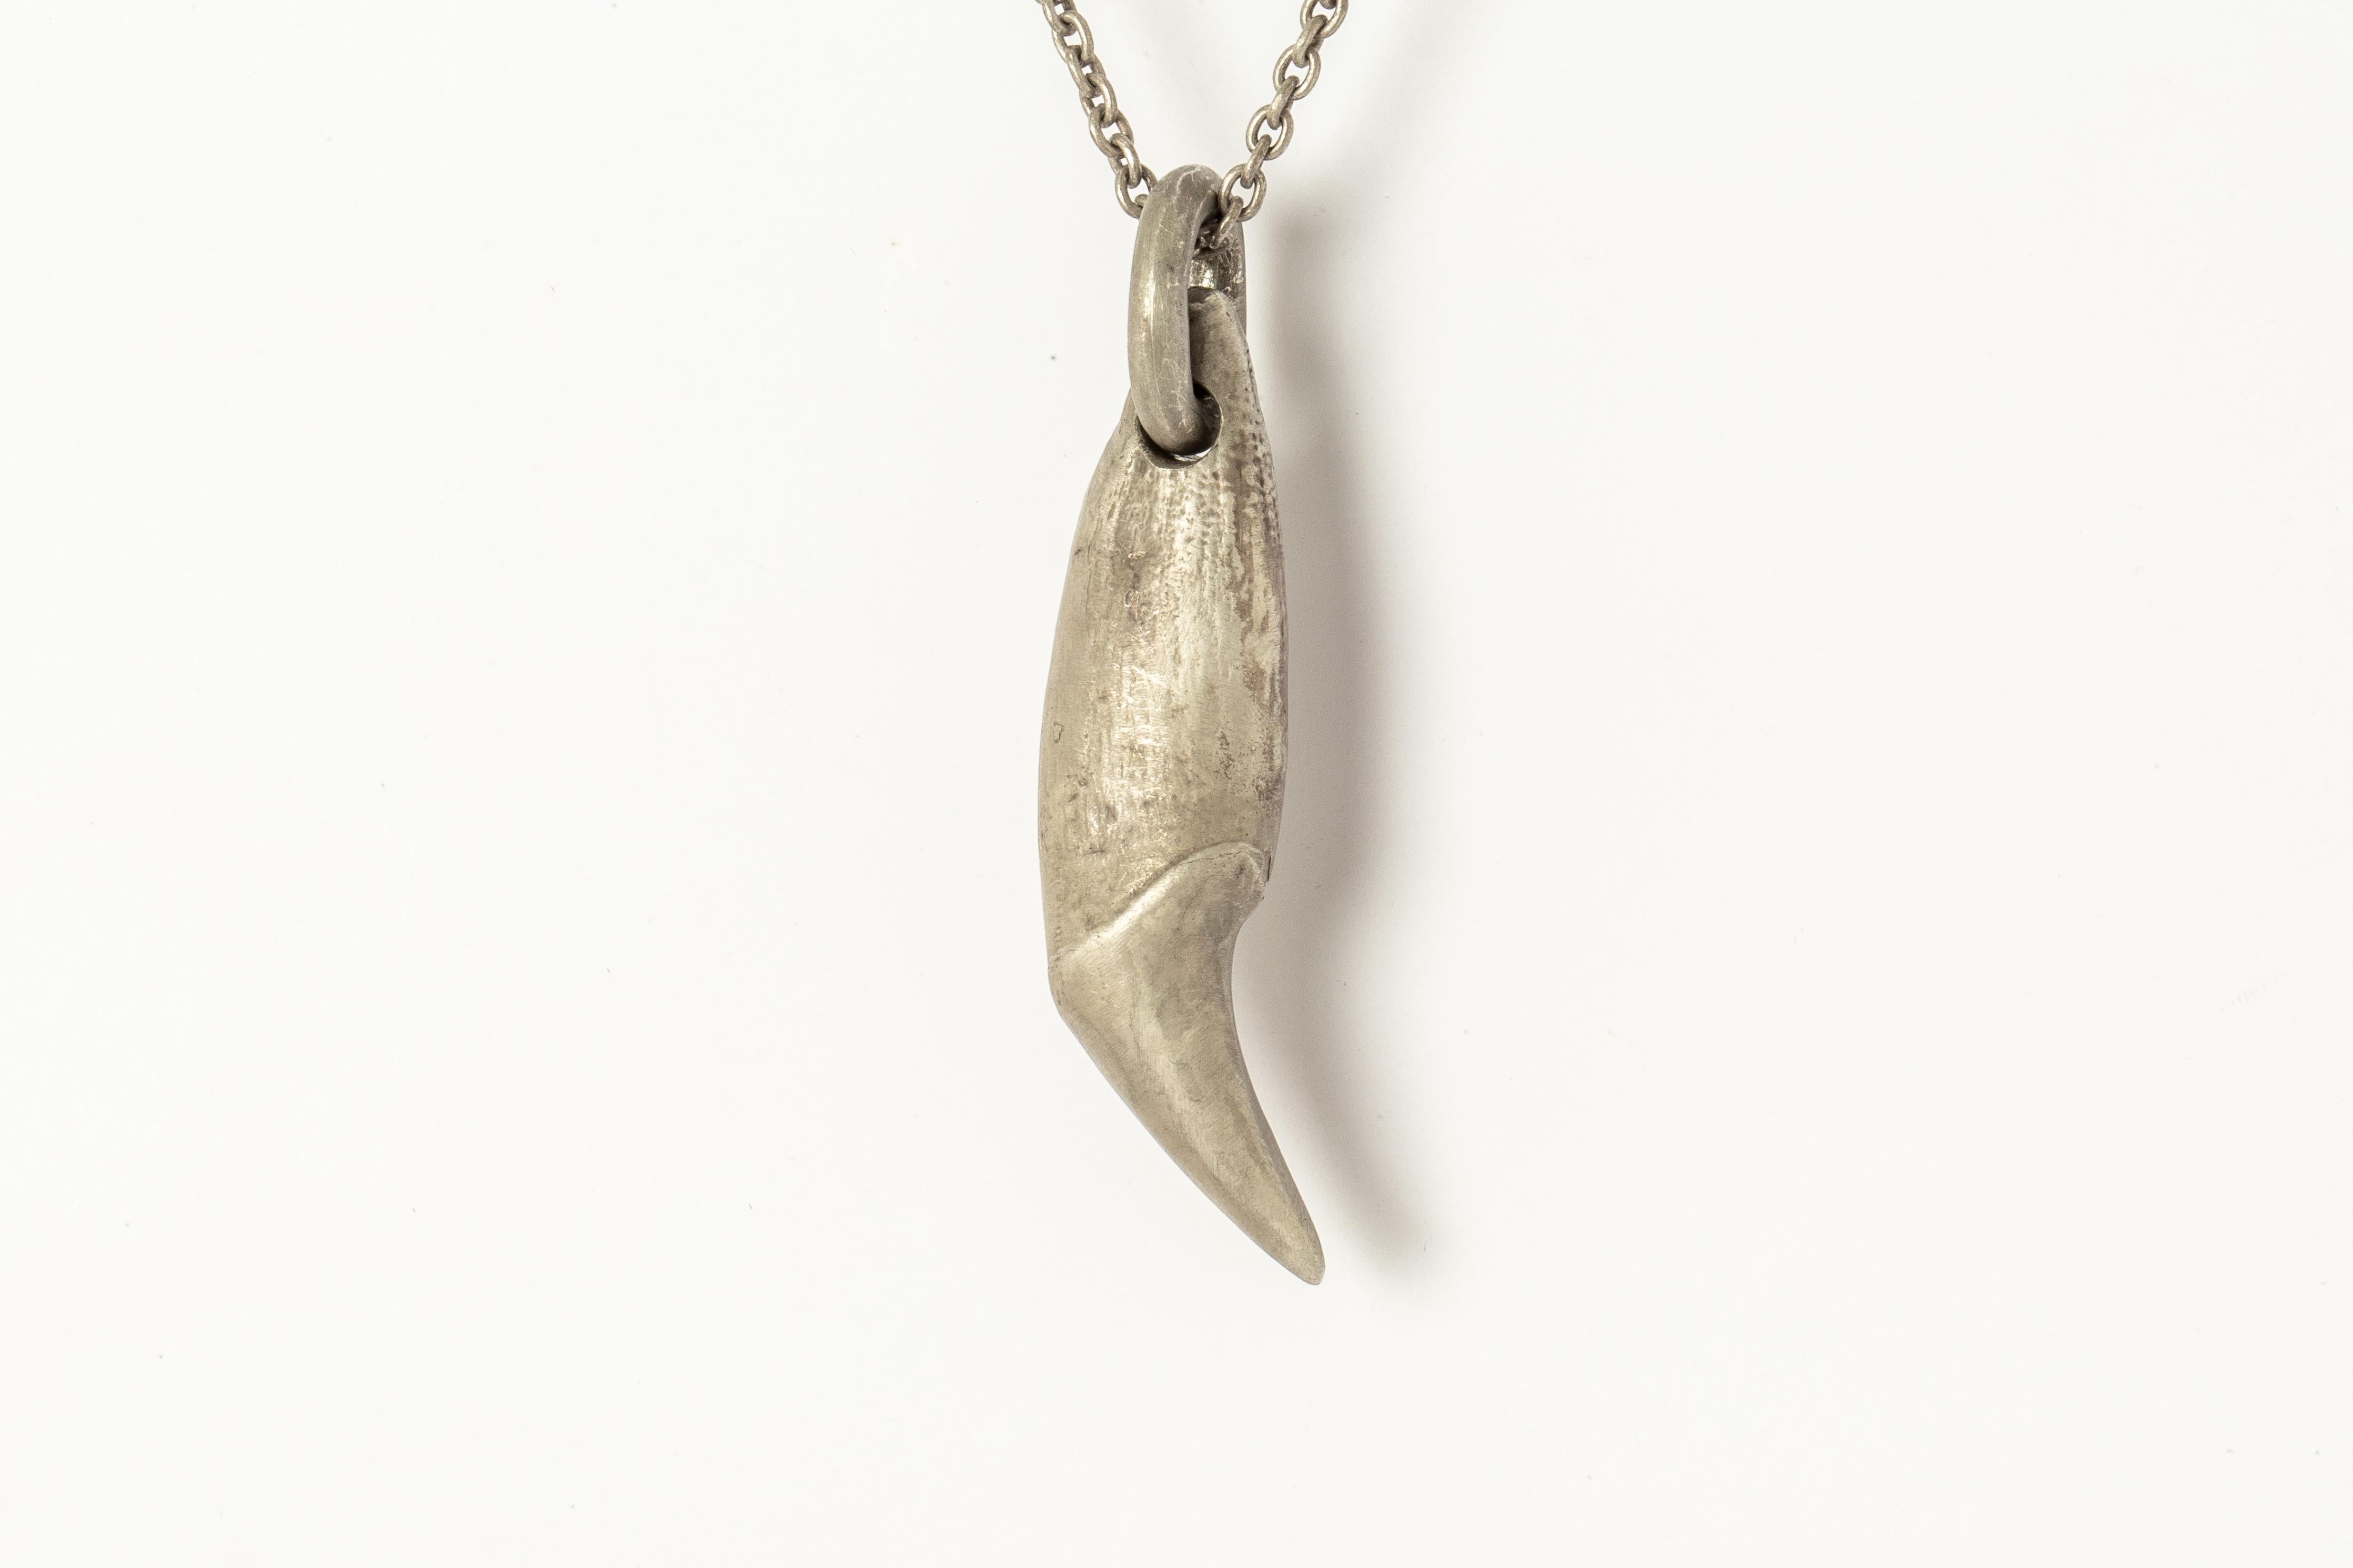 Bear Tooth Necklace Ghost (Medium, DA) In New Condition For Sale In Hong Kong, Hong Kong Island